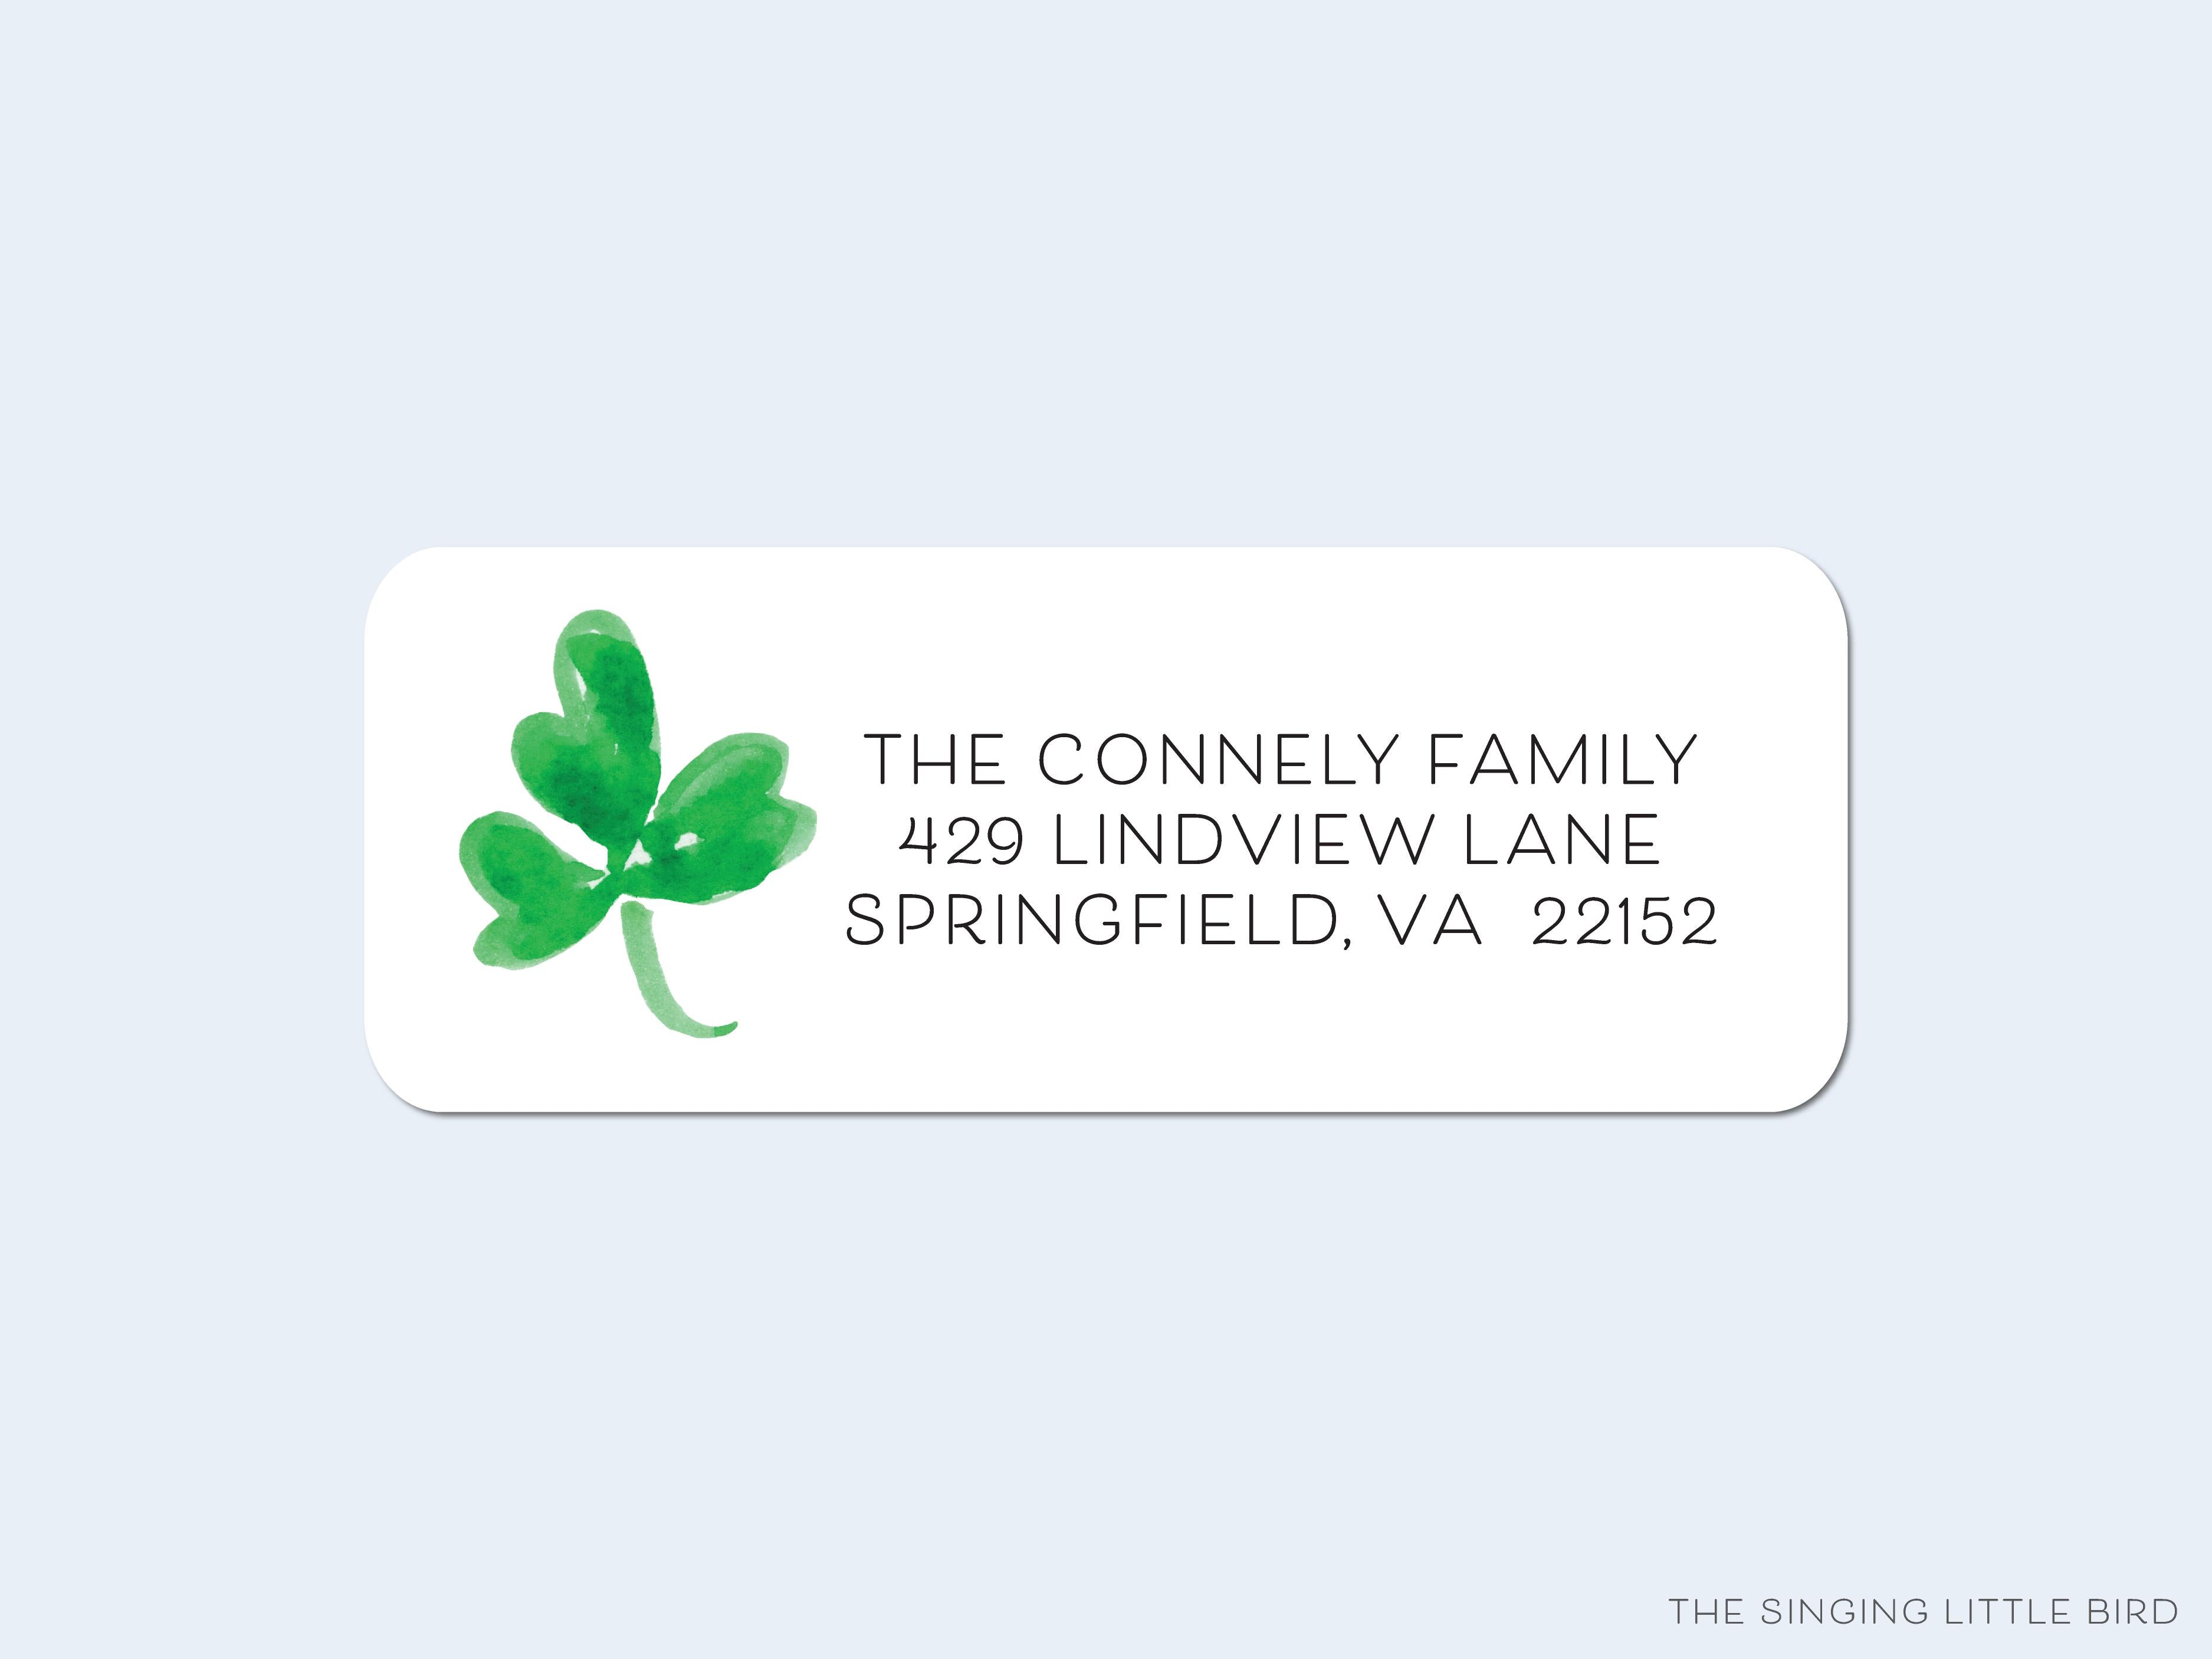 Shamrock Return Address Labels-These personalized return address labels are 2.625" x 1" and feature our hand-painted watercolor three leaf clover, printed in the USA on beautiful matte finish labels. These make great gifts for yourself or the shamrock lover.-The Singing Little Bird